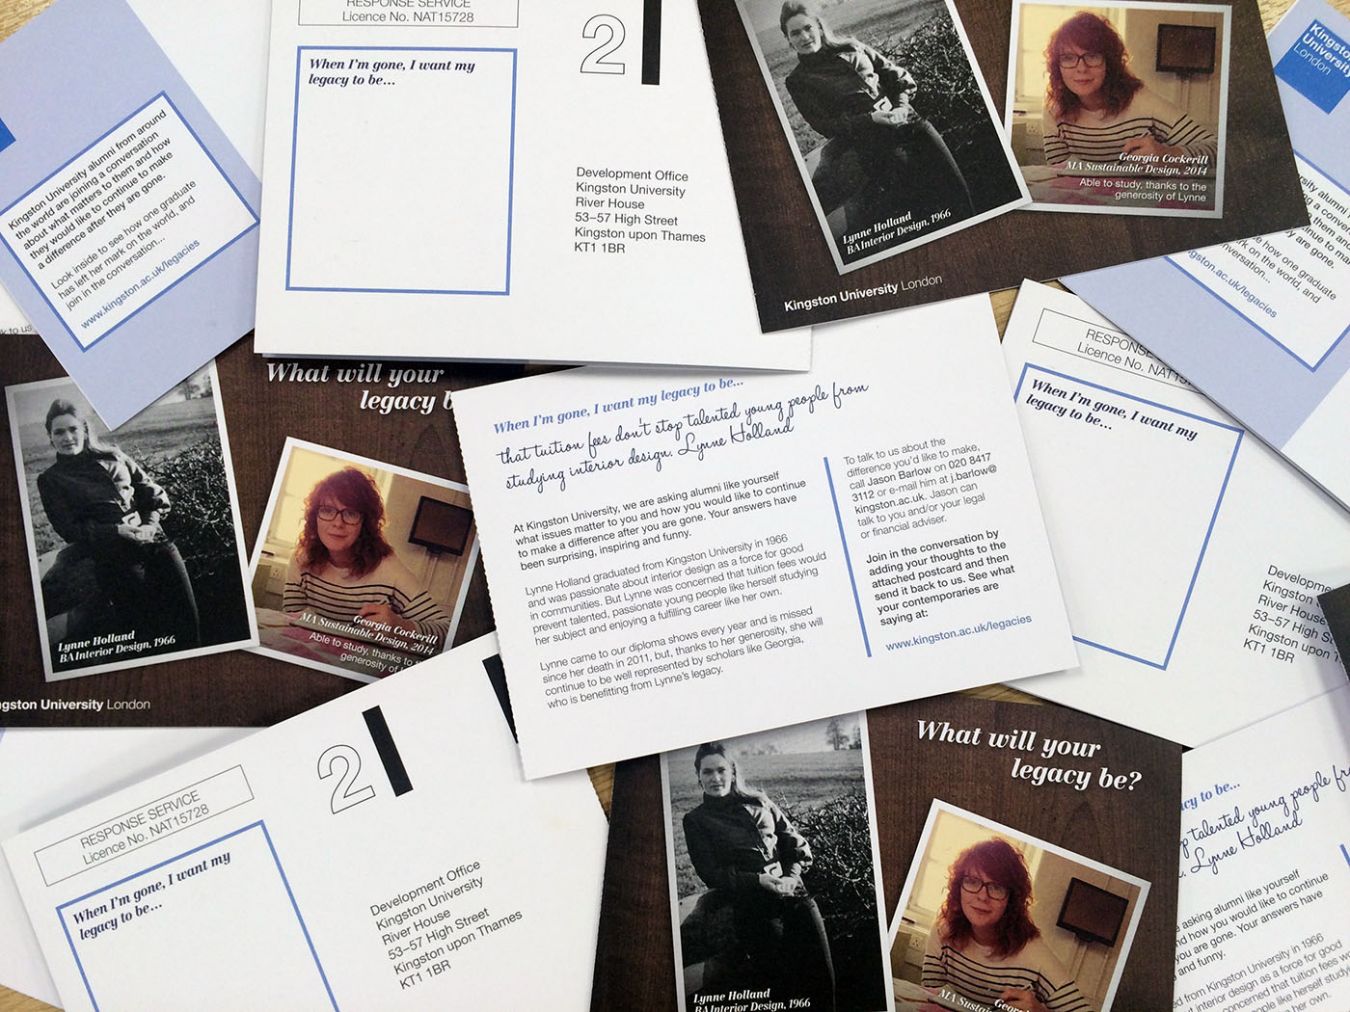 Kingston University has been asking its alumni how they want to be remembered as part of a new legacy campaign.